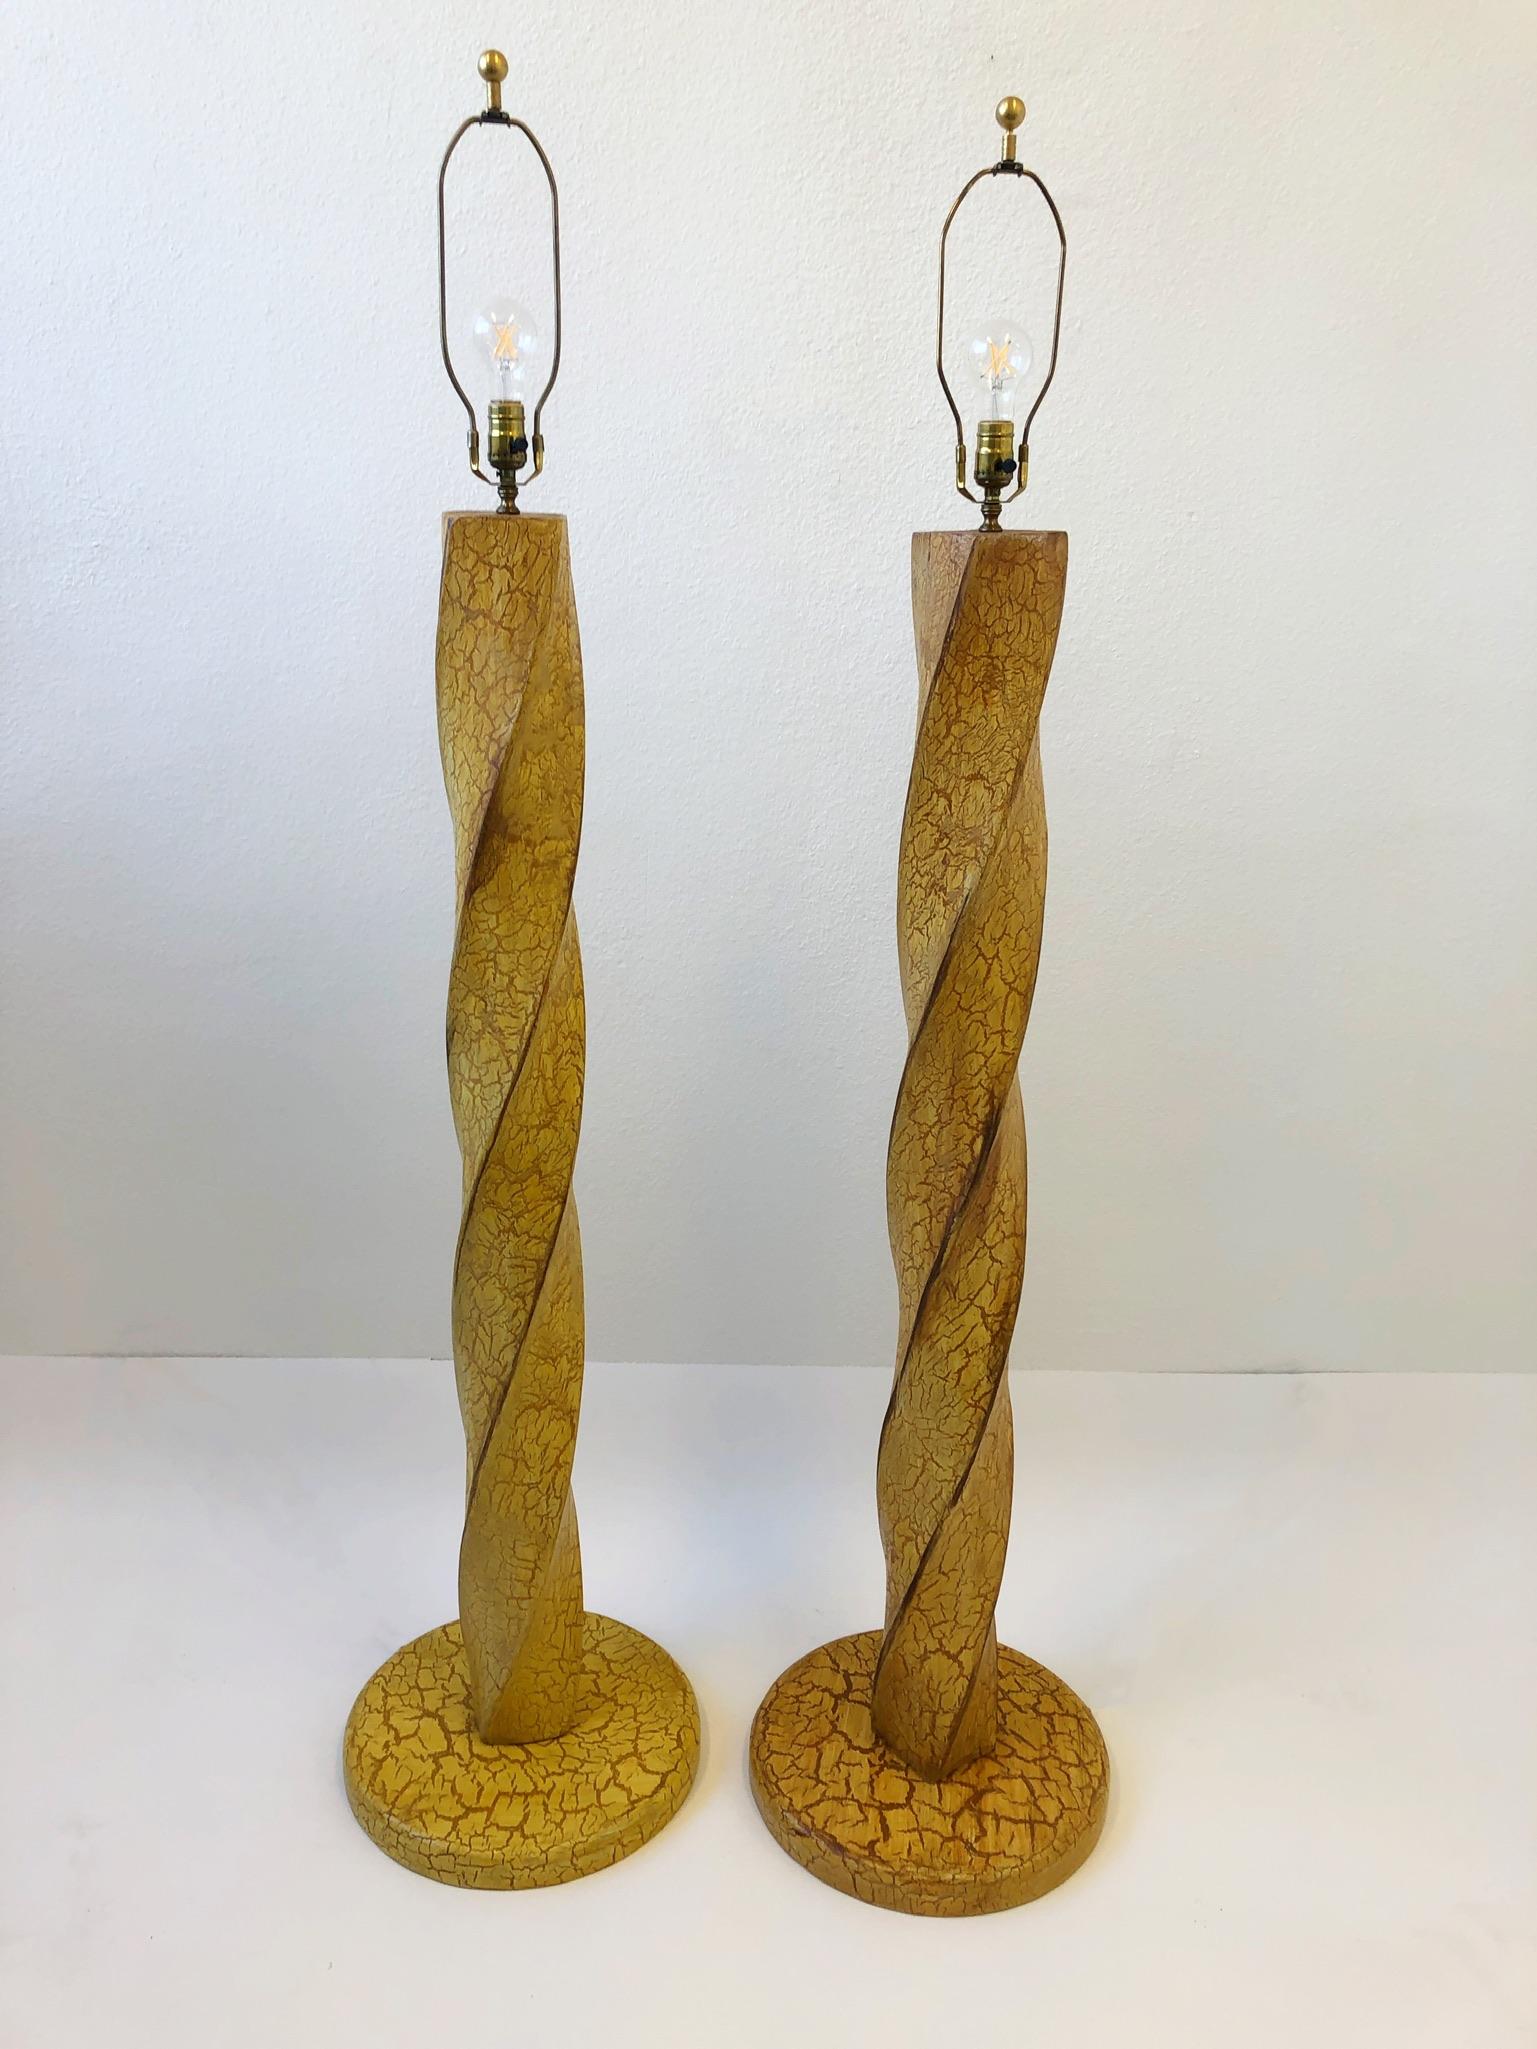 Pair of carved wood floor lamps with a custom crackle lacquered finish design by Dana Creath designs for Steve Chase in the 1980s.
Newly rewired, shades are original.
They show minor wear consistent with age.
Measurements: 16” diameter, 67.5”